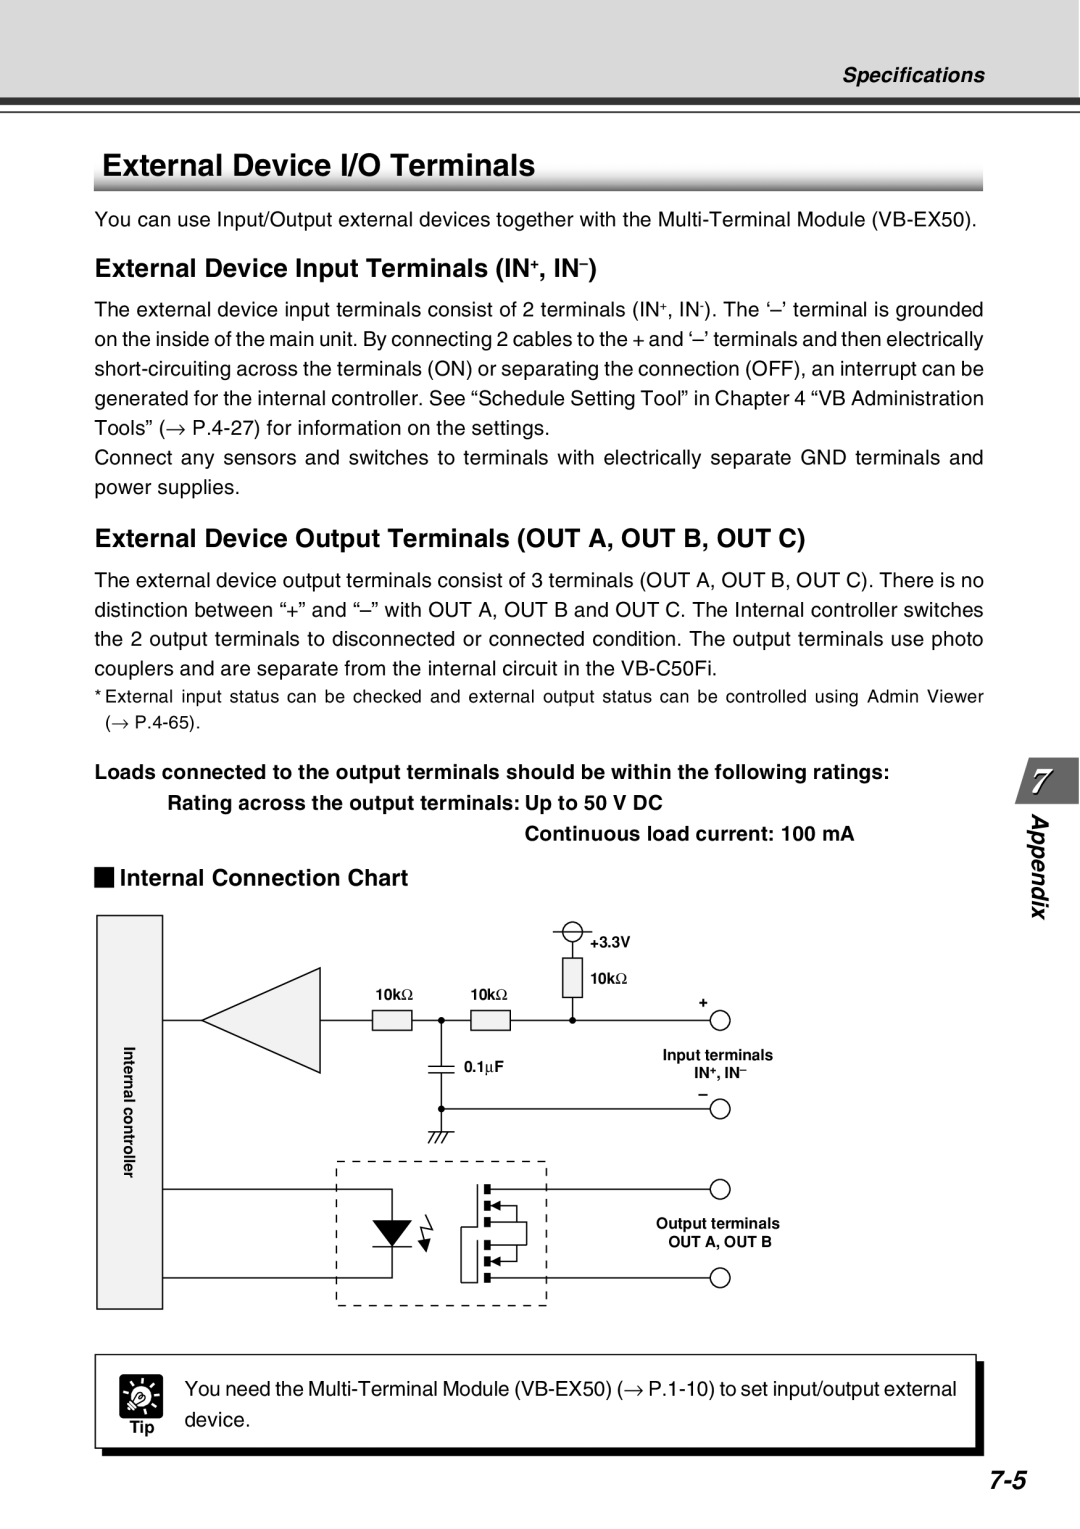 Canon Vb-C50fi user manual External Device I/O Terminals, External Device Input Terminals IN+, IN, Appendix, Specifications 